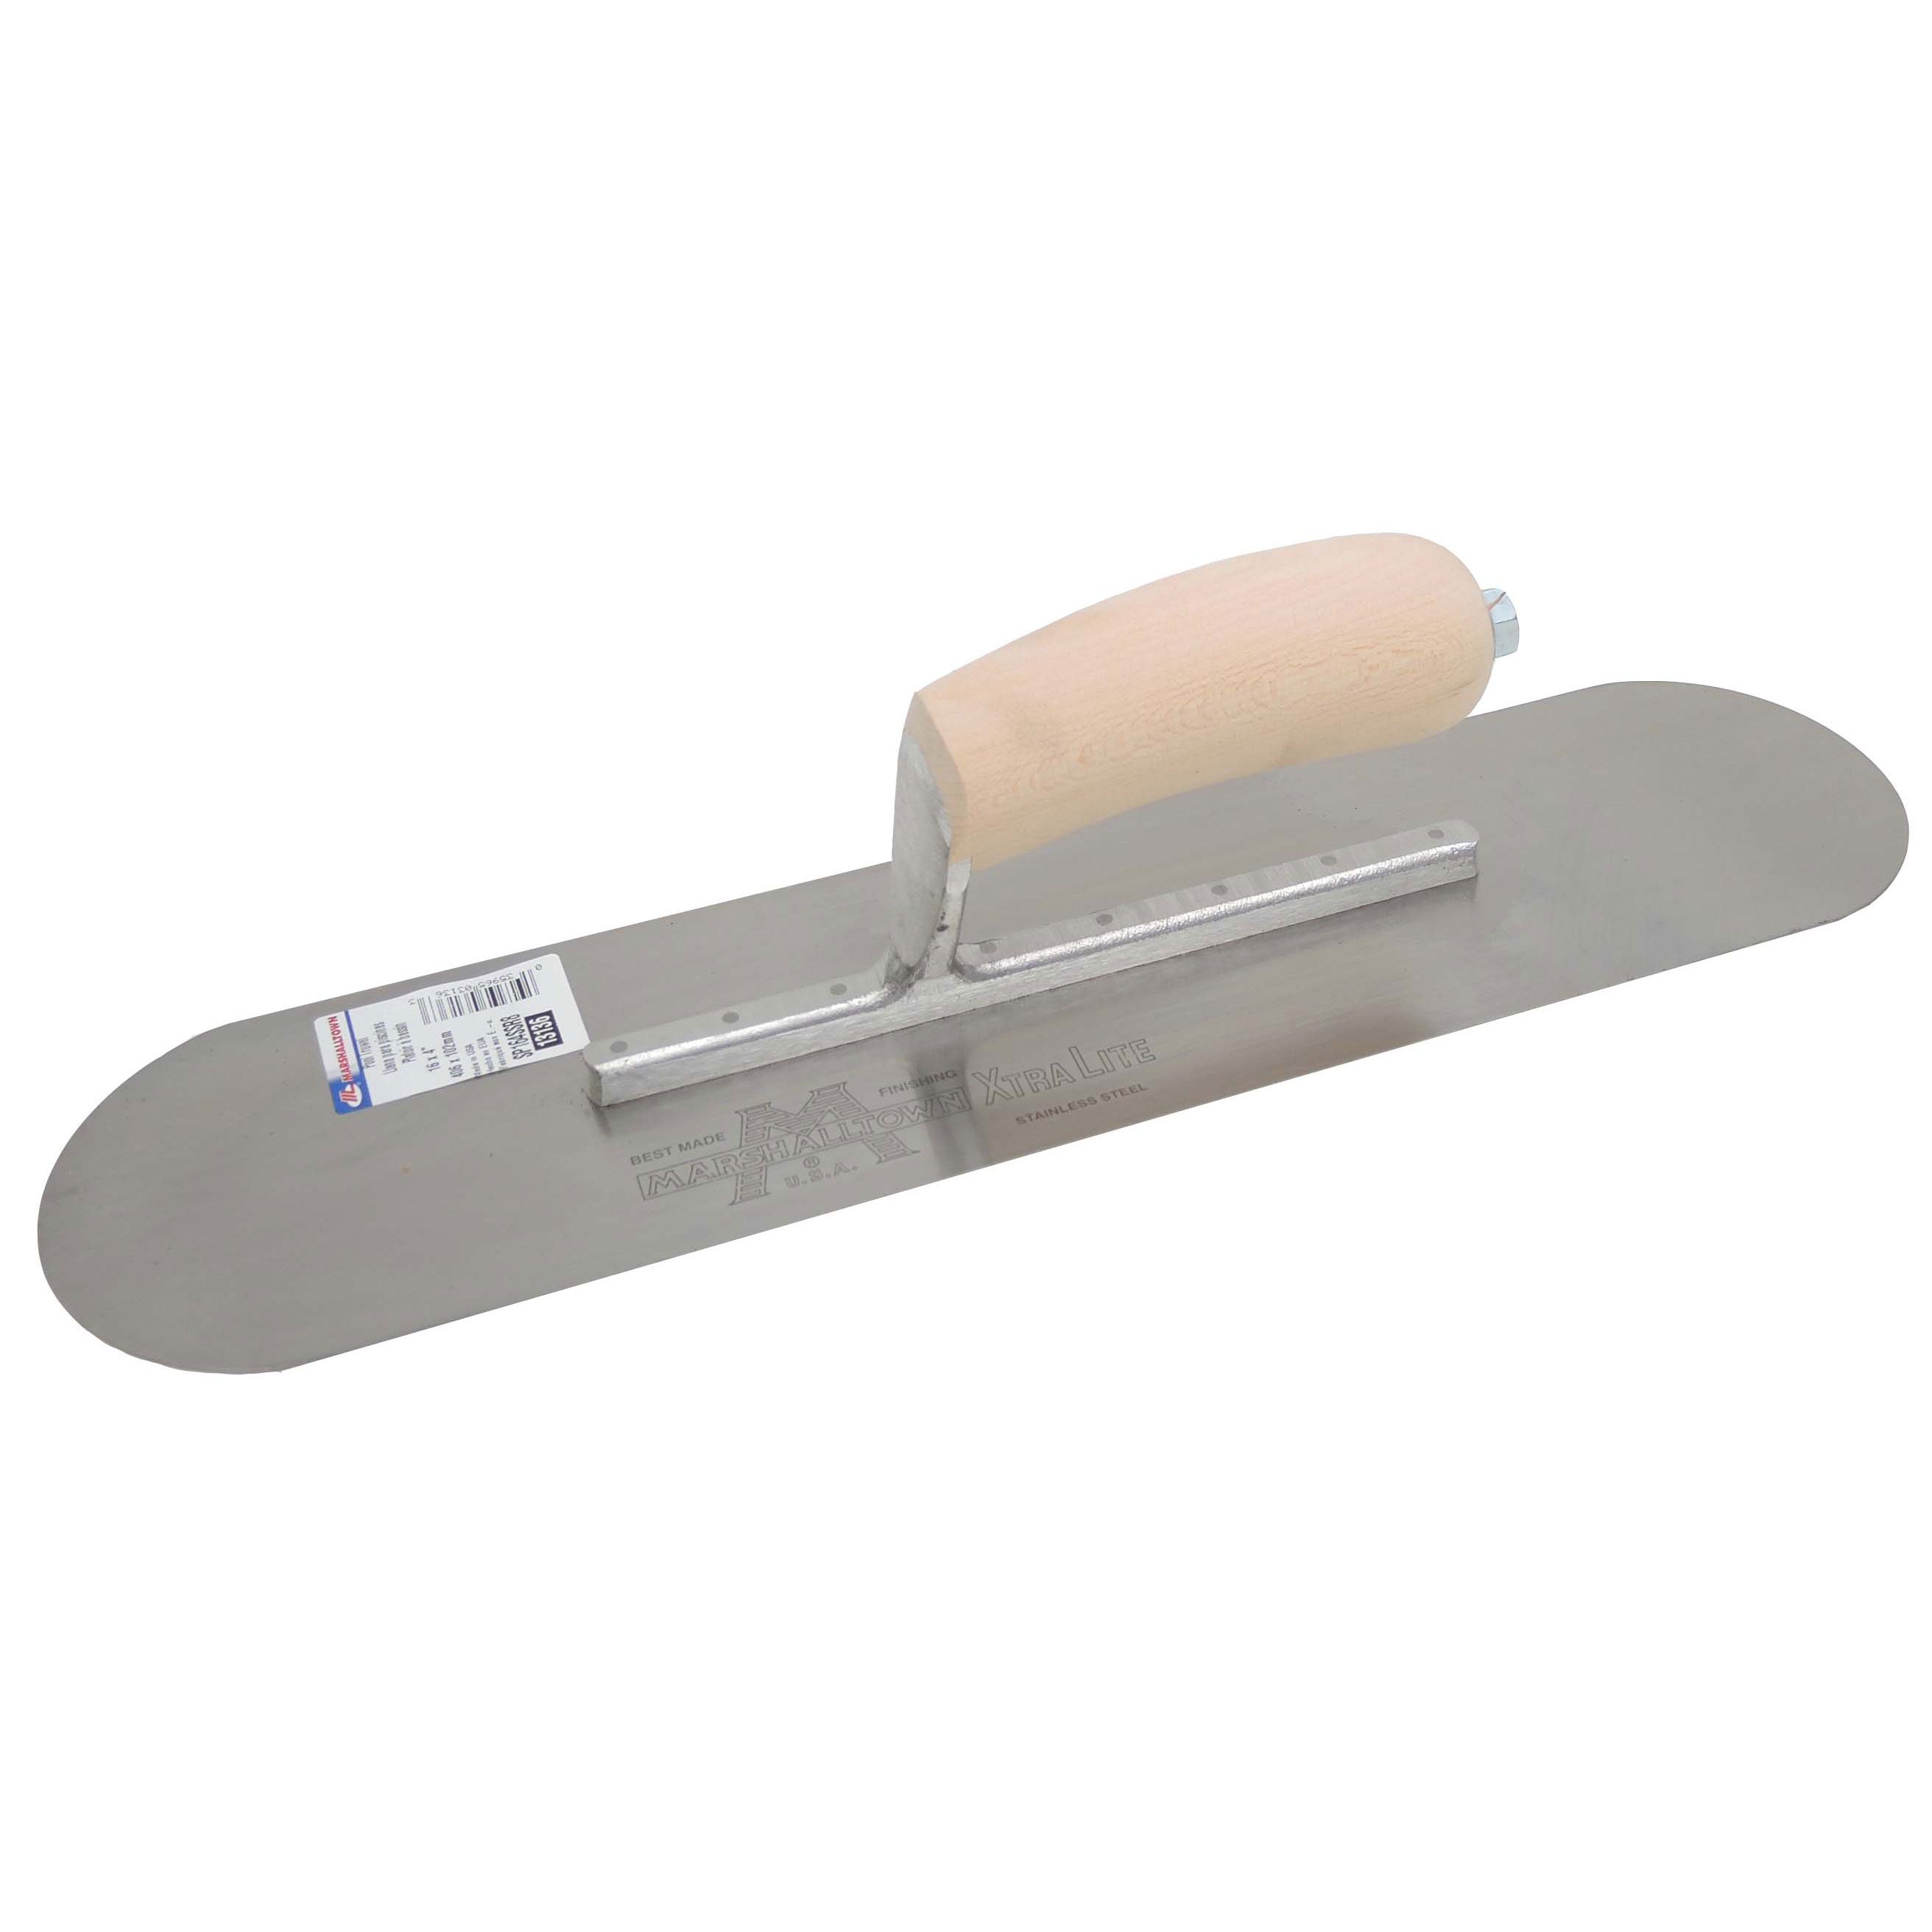 Marshalltown SP164SSR8 16in x 4in Pool Trowel with Exposed Rivet Trowels and Wood Handle SP164SSR8